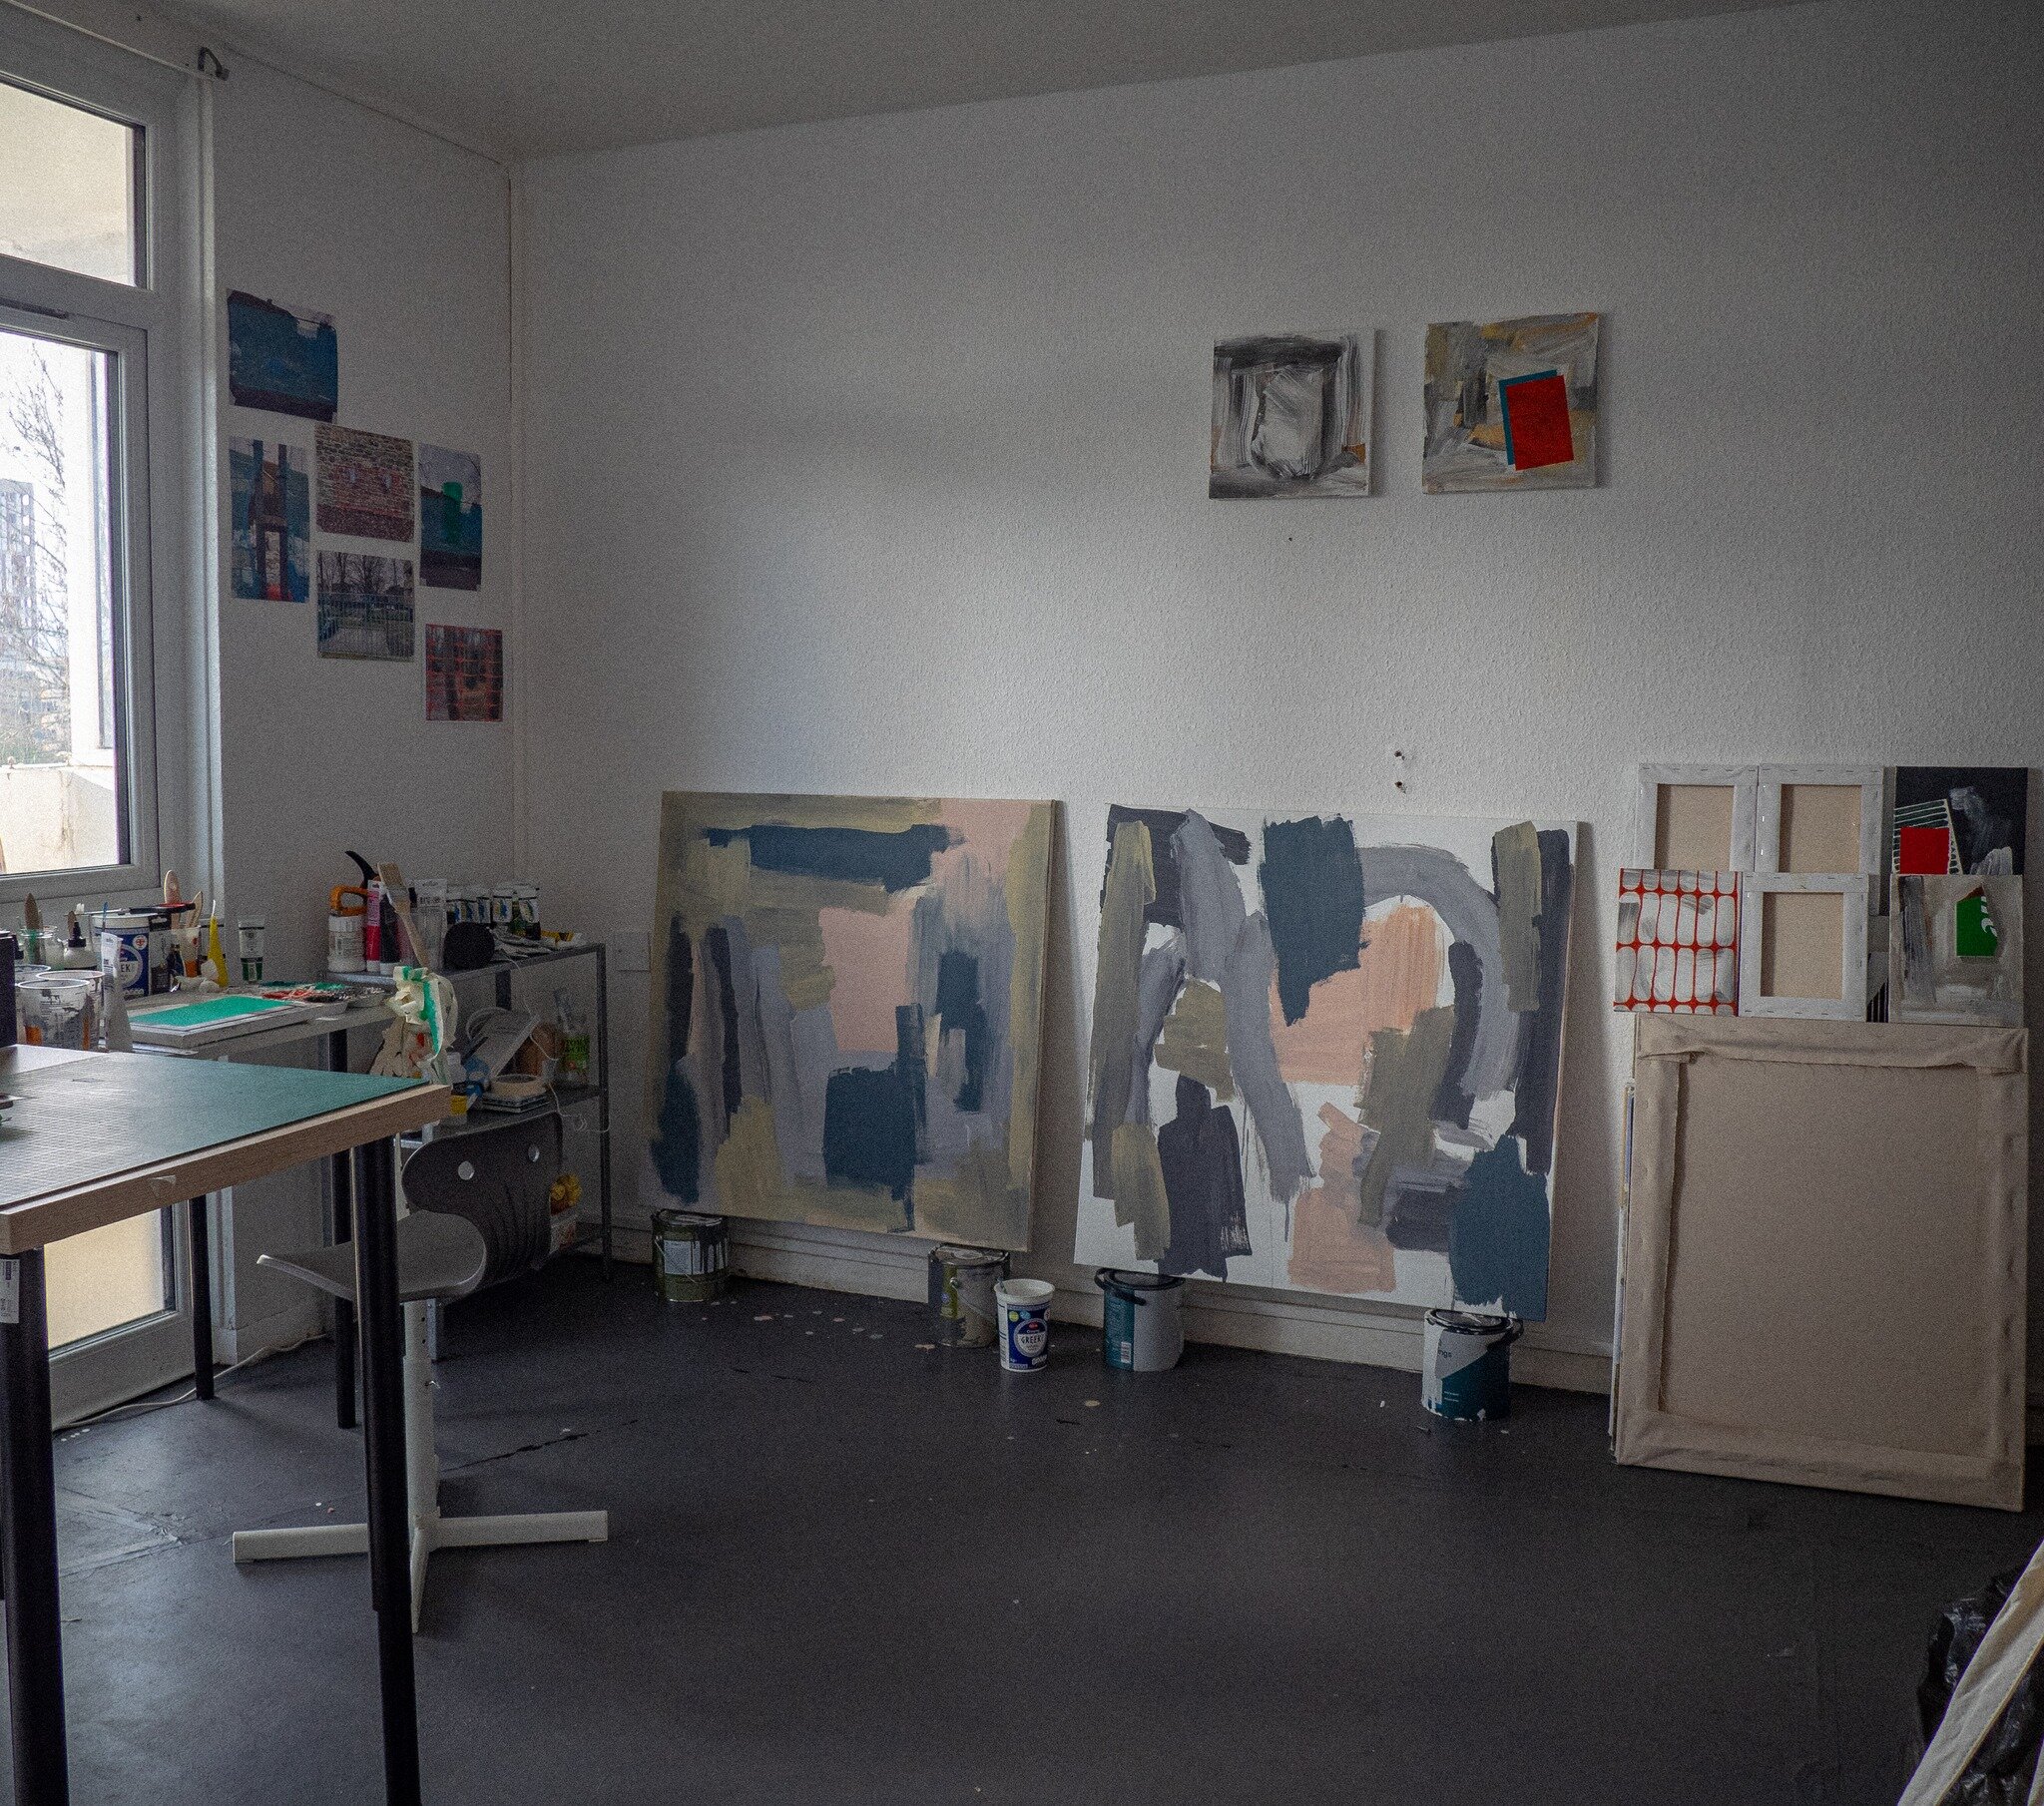 A long overdue shot of my new Thamesmead studio home, now that it's been fully setup for a couple of months and my creativity is back in full swing. 

Lots of work in progress going on here across various canvases, picking out colours and objects fro